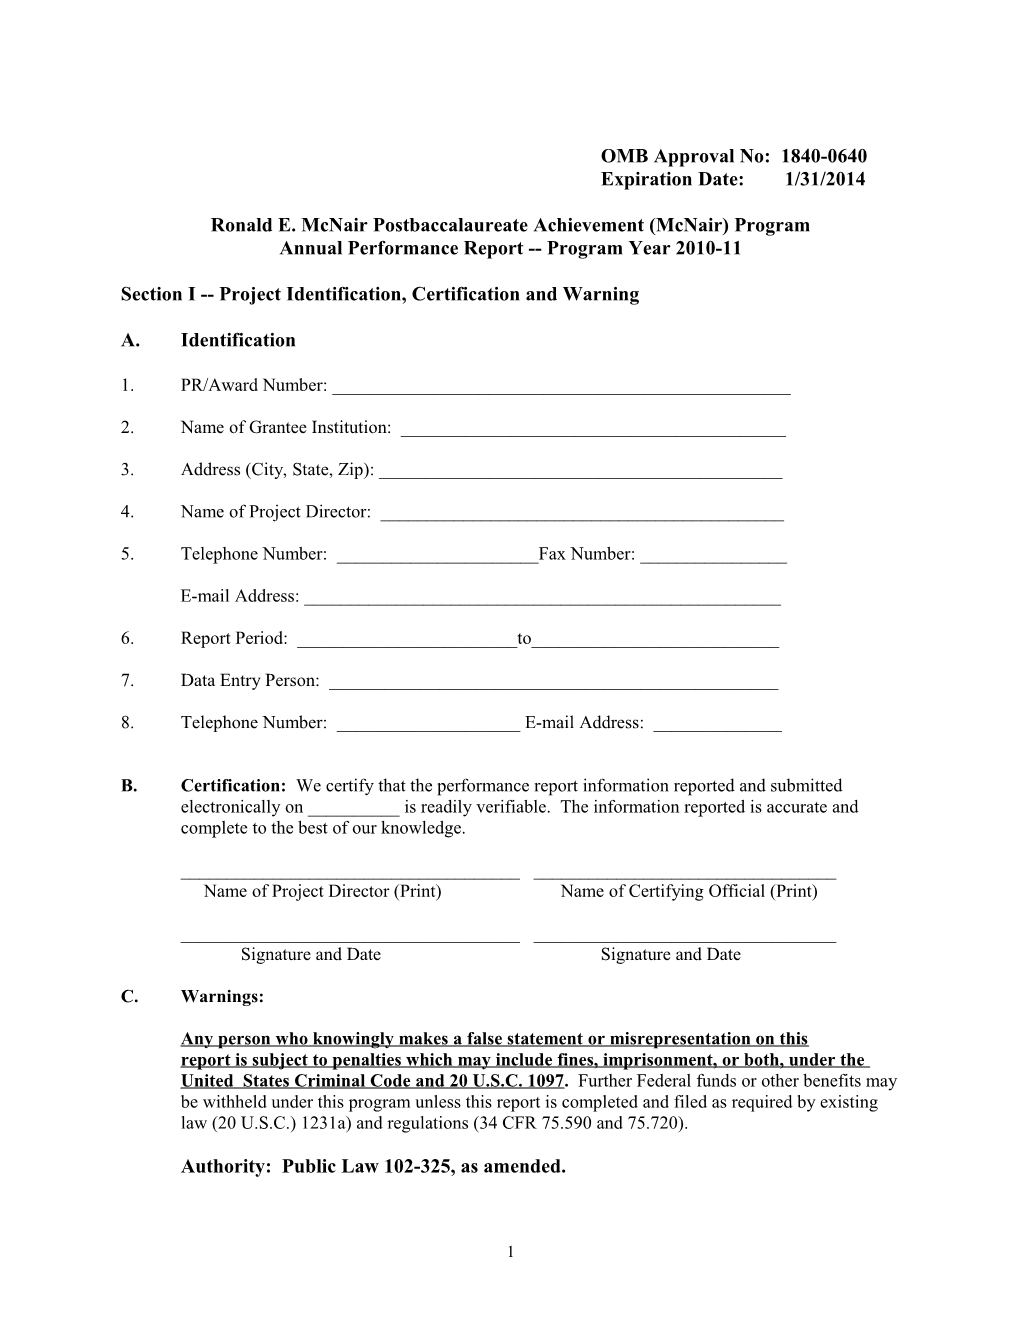 FY 2010-2011 Annual Performance Report Form for the Ronald Mcnair Program (MS Word)